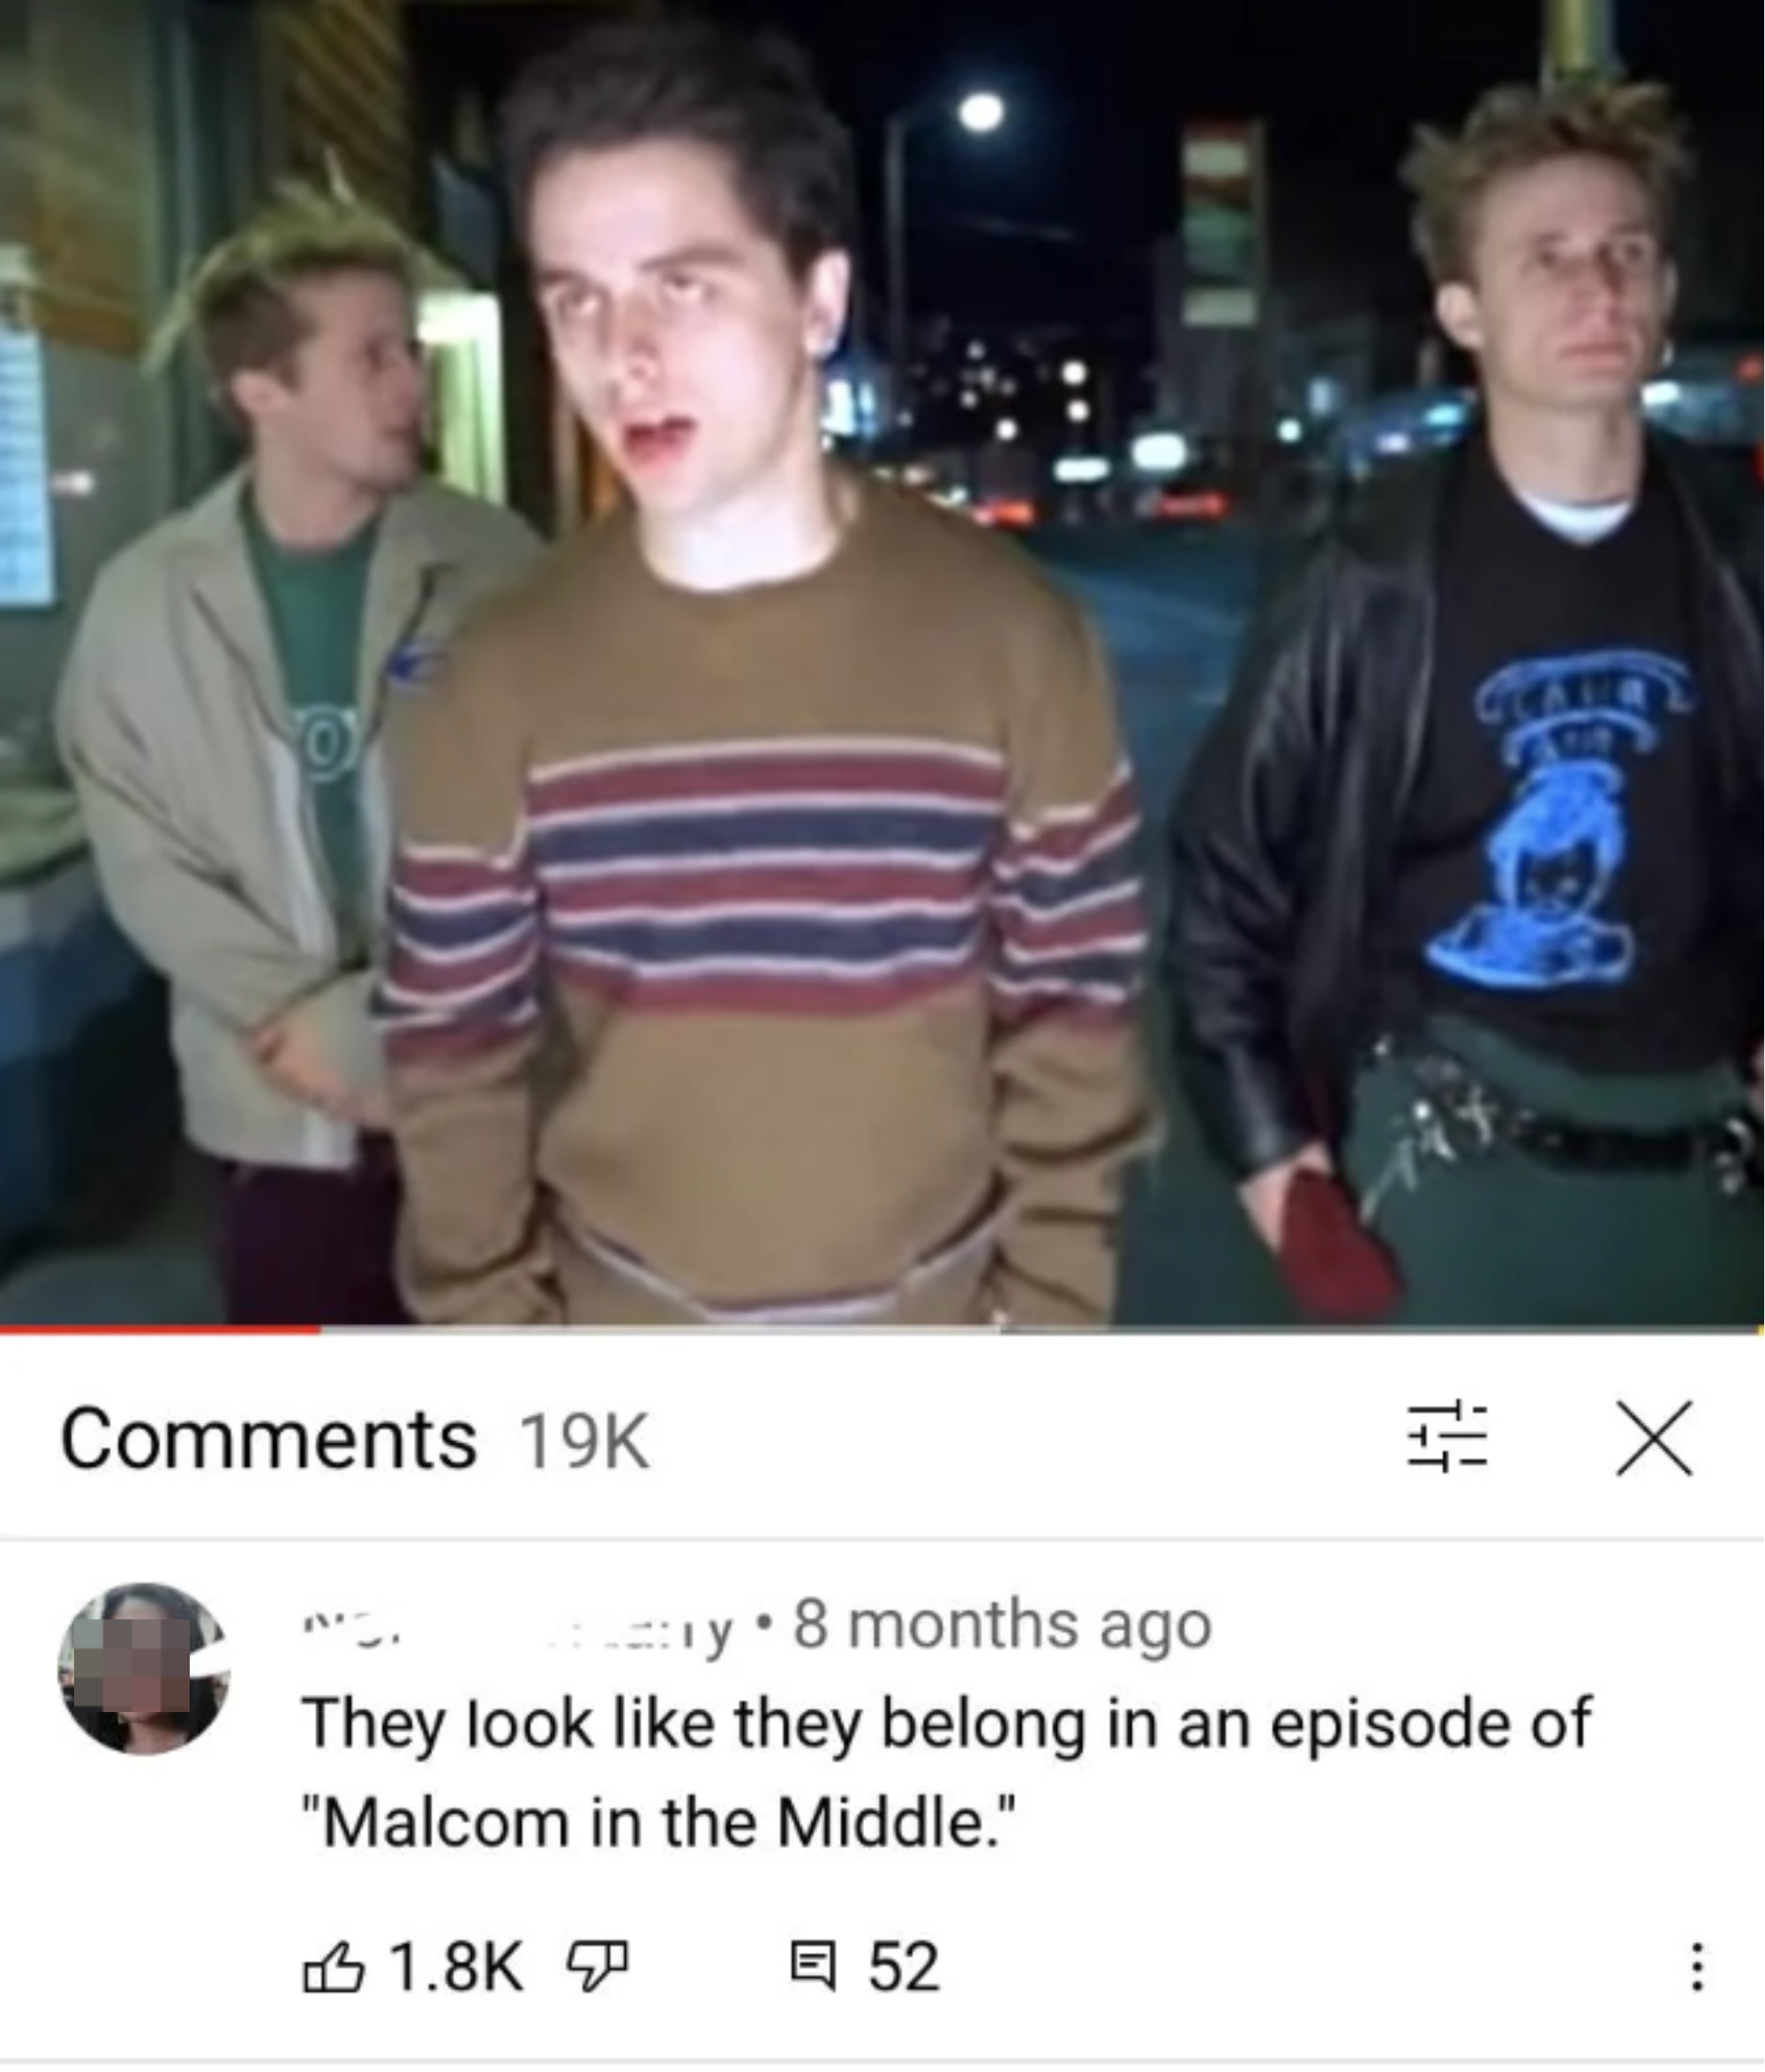 commenter from the video says, they look like they belong in an episode of malcom in the middle